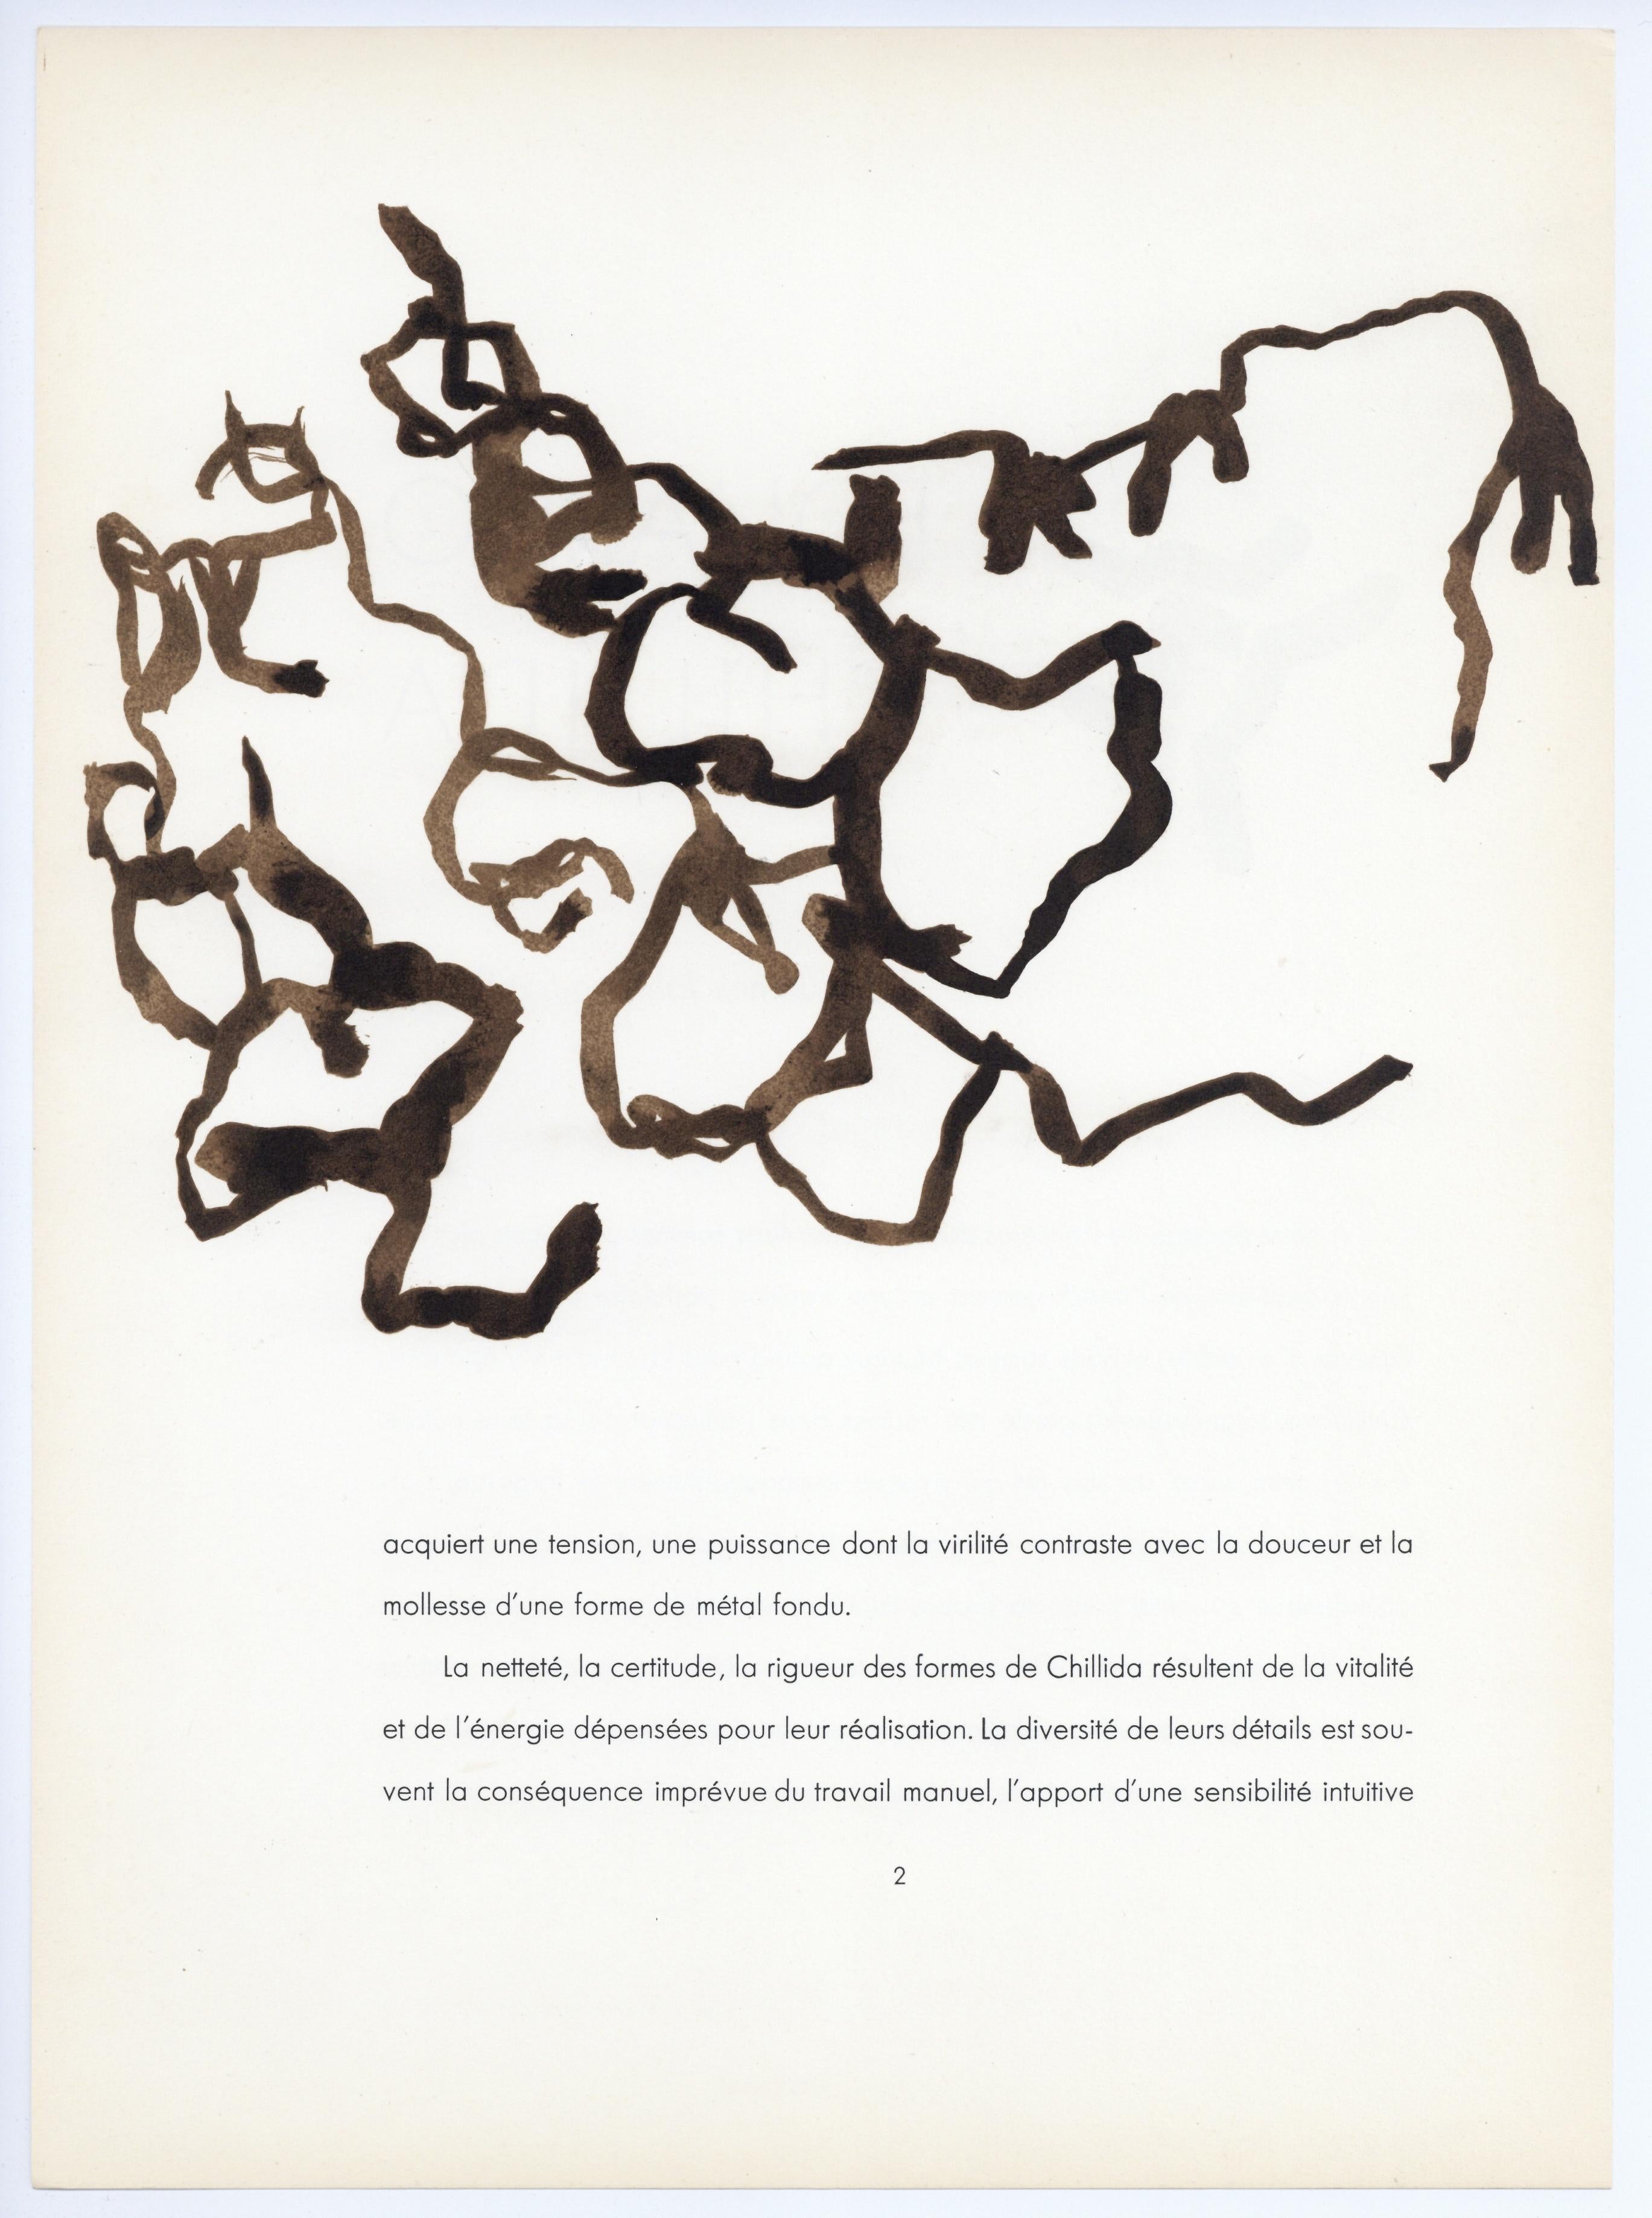 Medium: original lithograph. Printed in 1961 for Derrière le Miroir (issue number 124) and published in Paris by Maeght. Image size: 8 x 10 1/2 inches. Sheet size: 15 x 11 inches (377 x 277 mm). There is printed text beneath the image and on back of